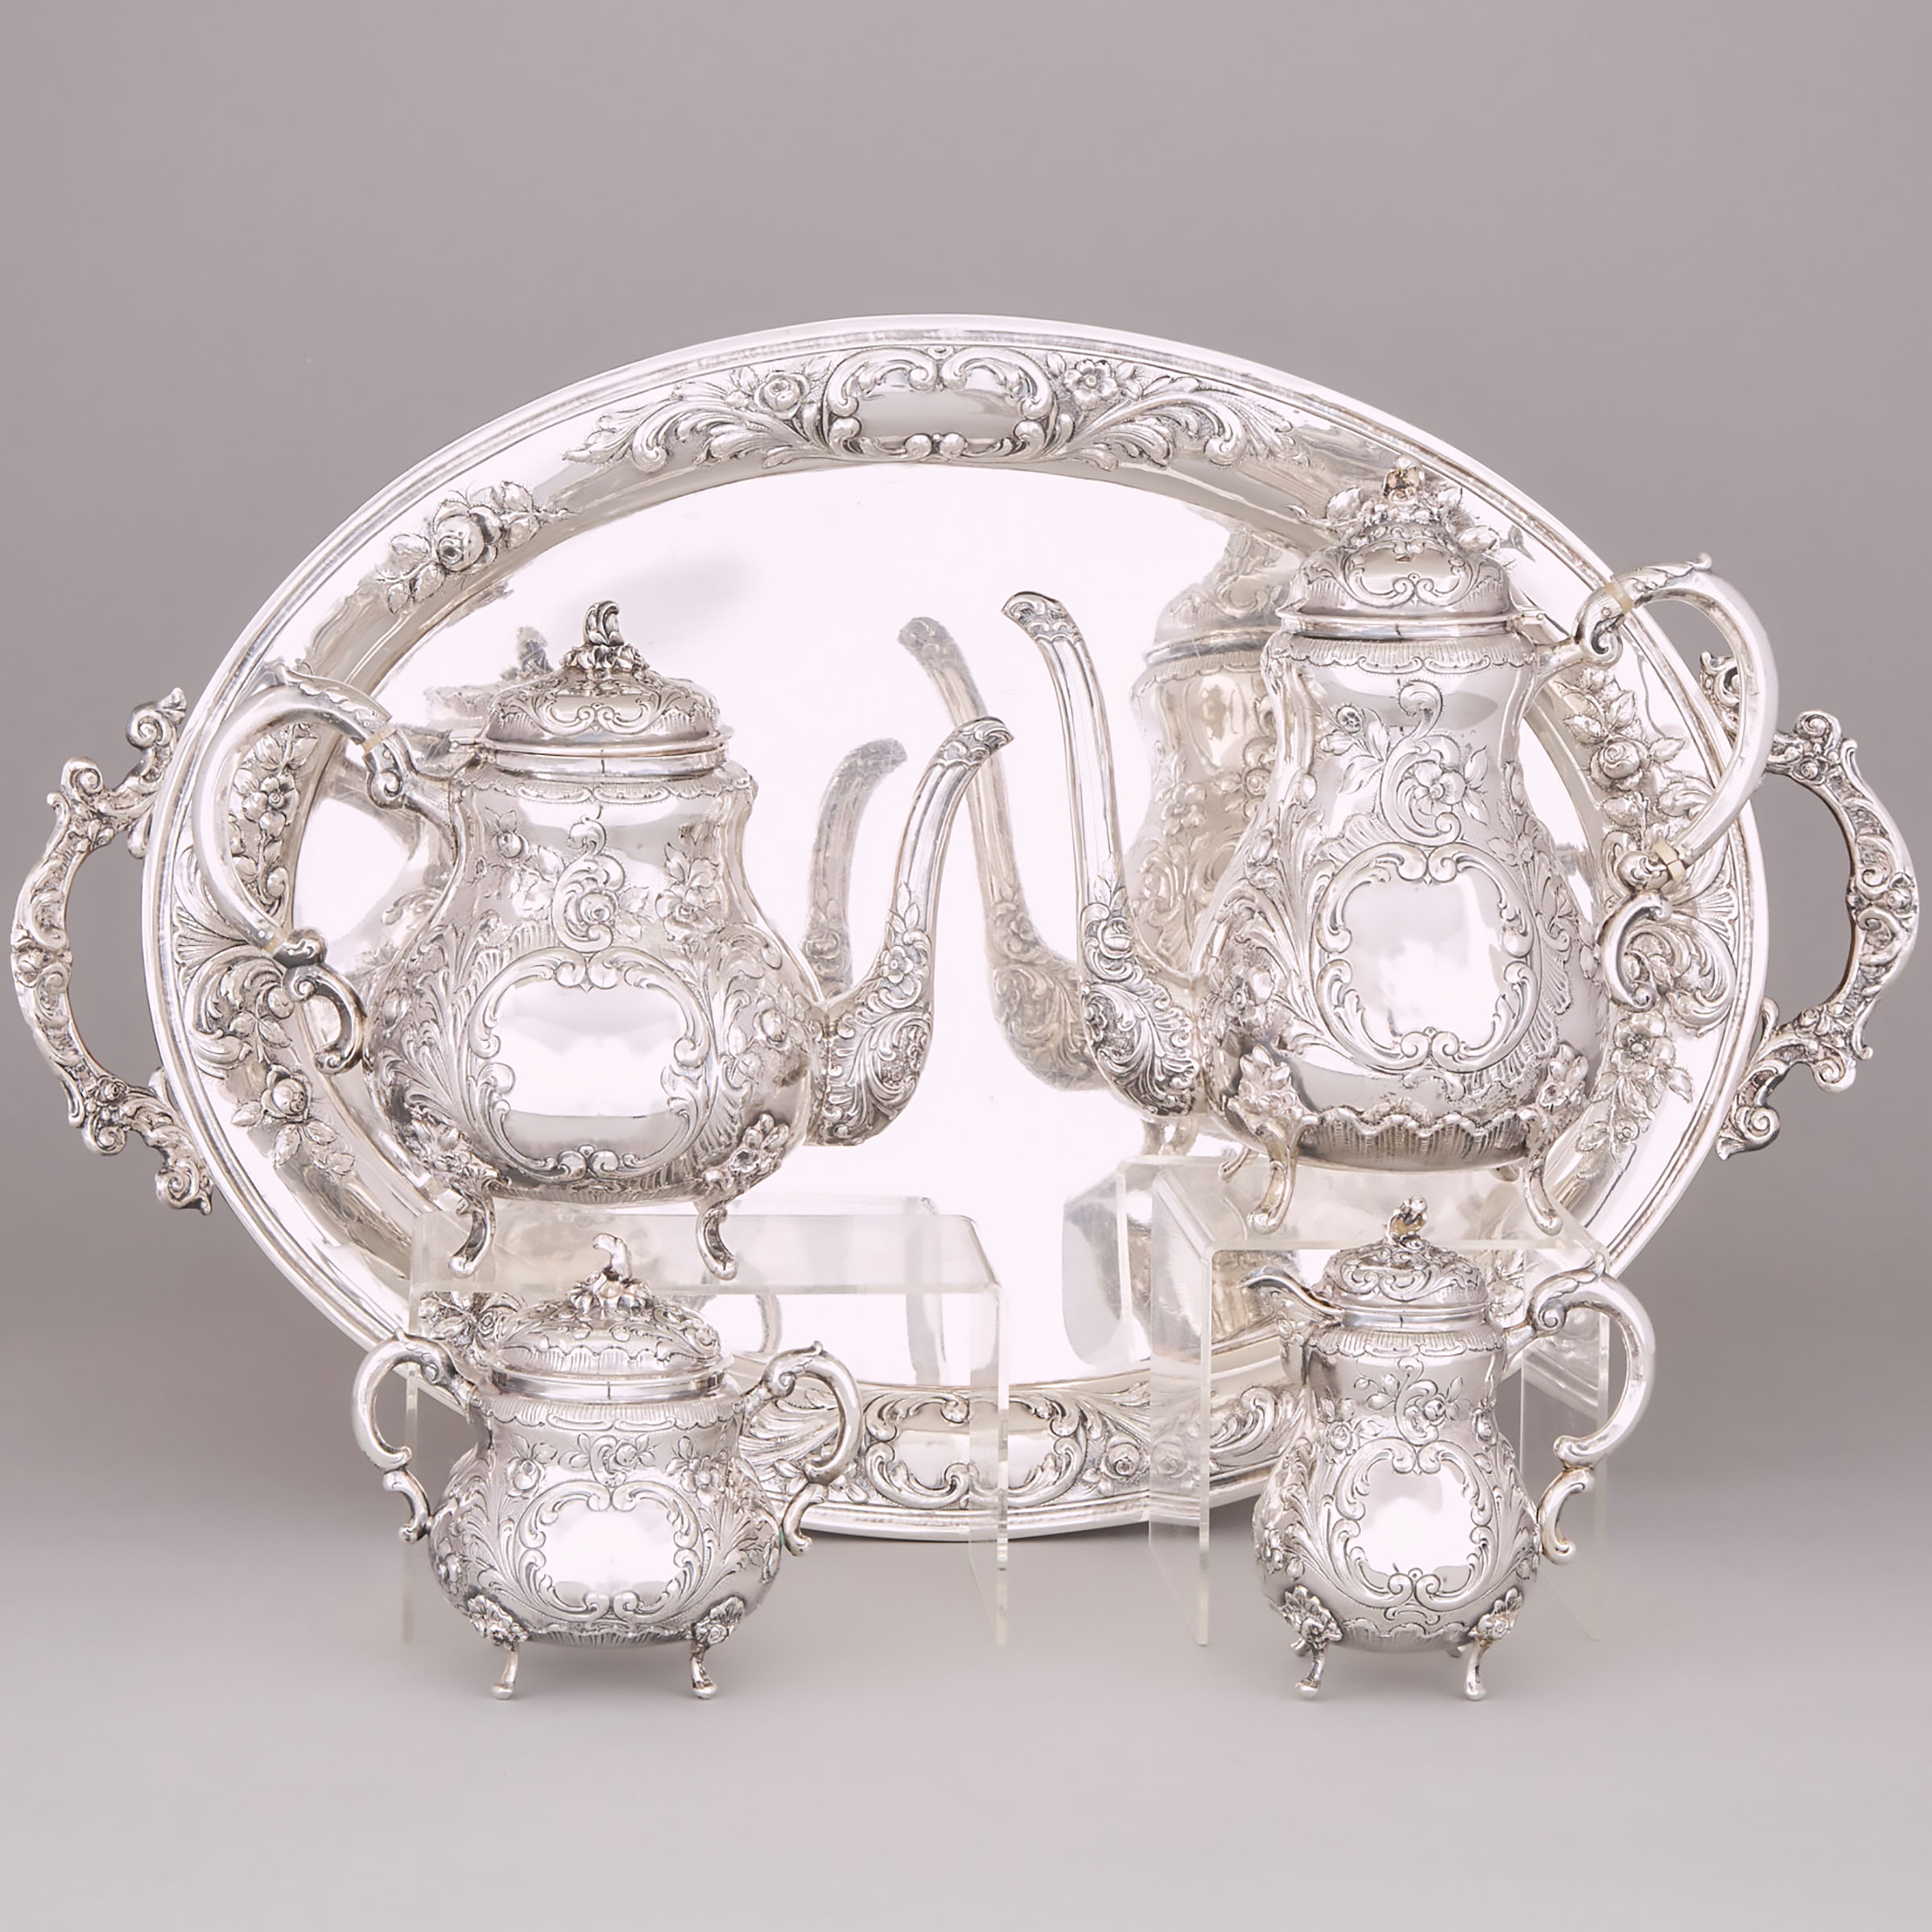 Continental Silver Tea and Coffee Service, probably German, early 20th century